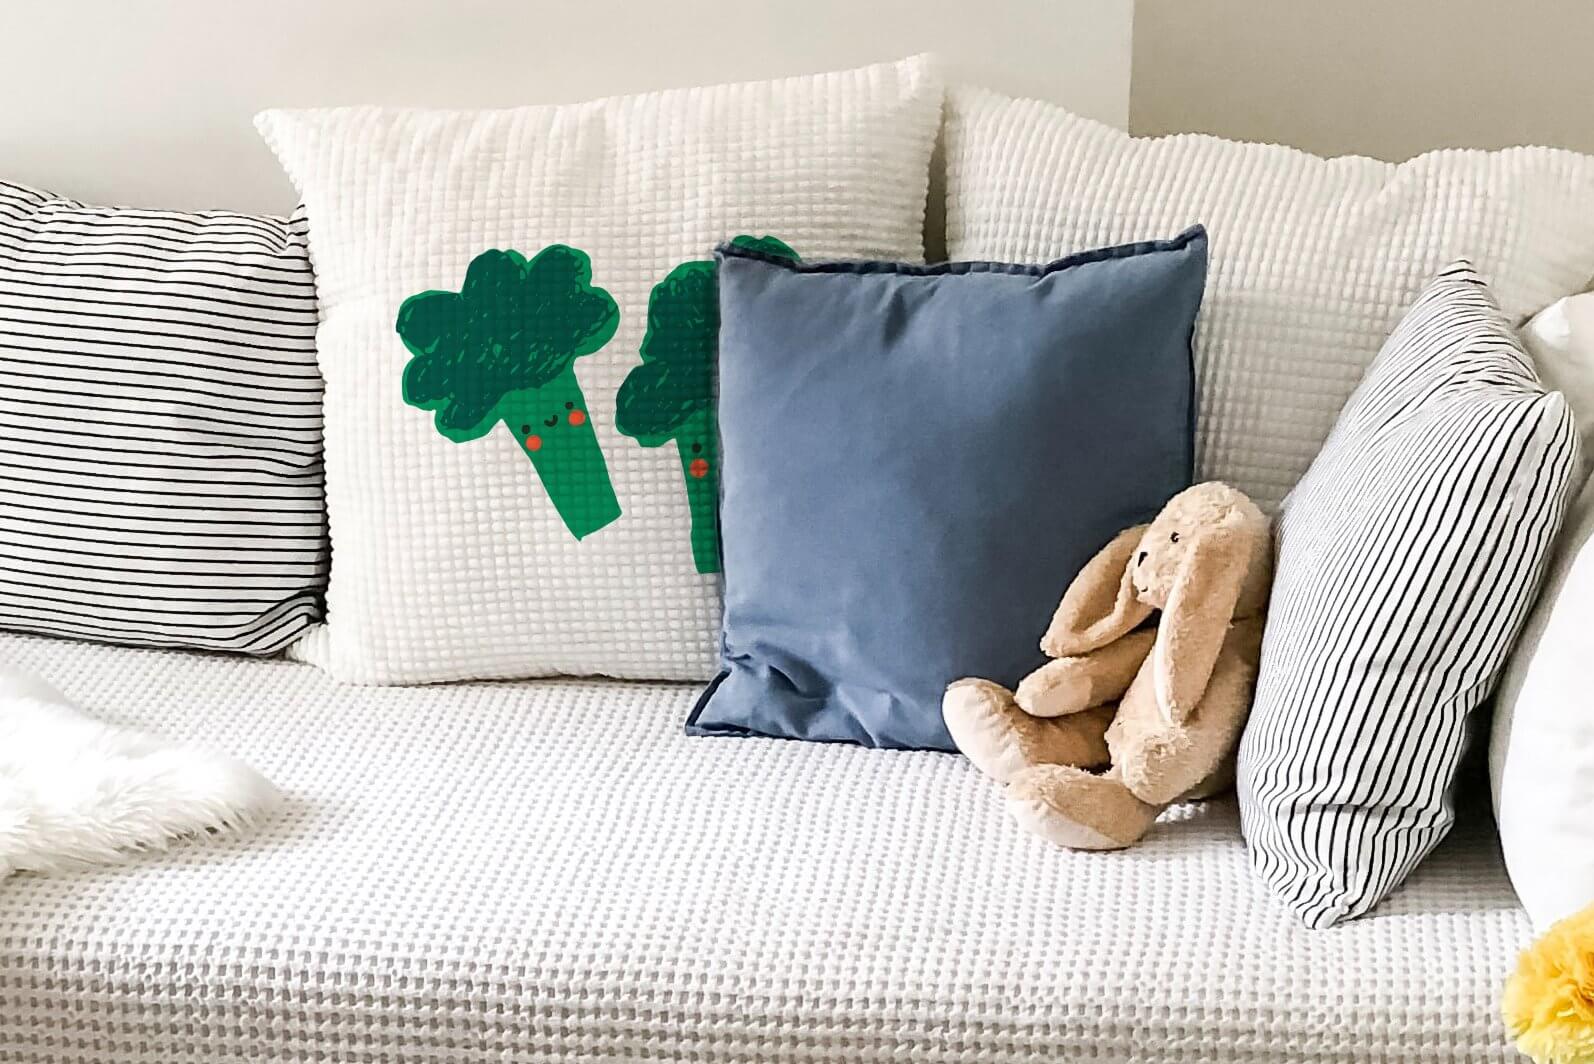 Two green cheerful broccoli are painted on the waffle texture of the pillow.